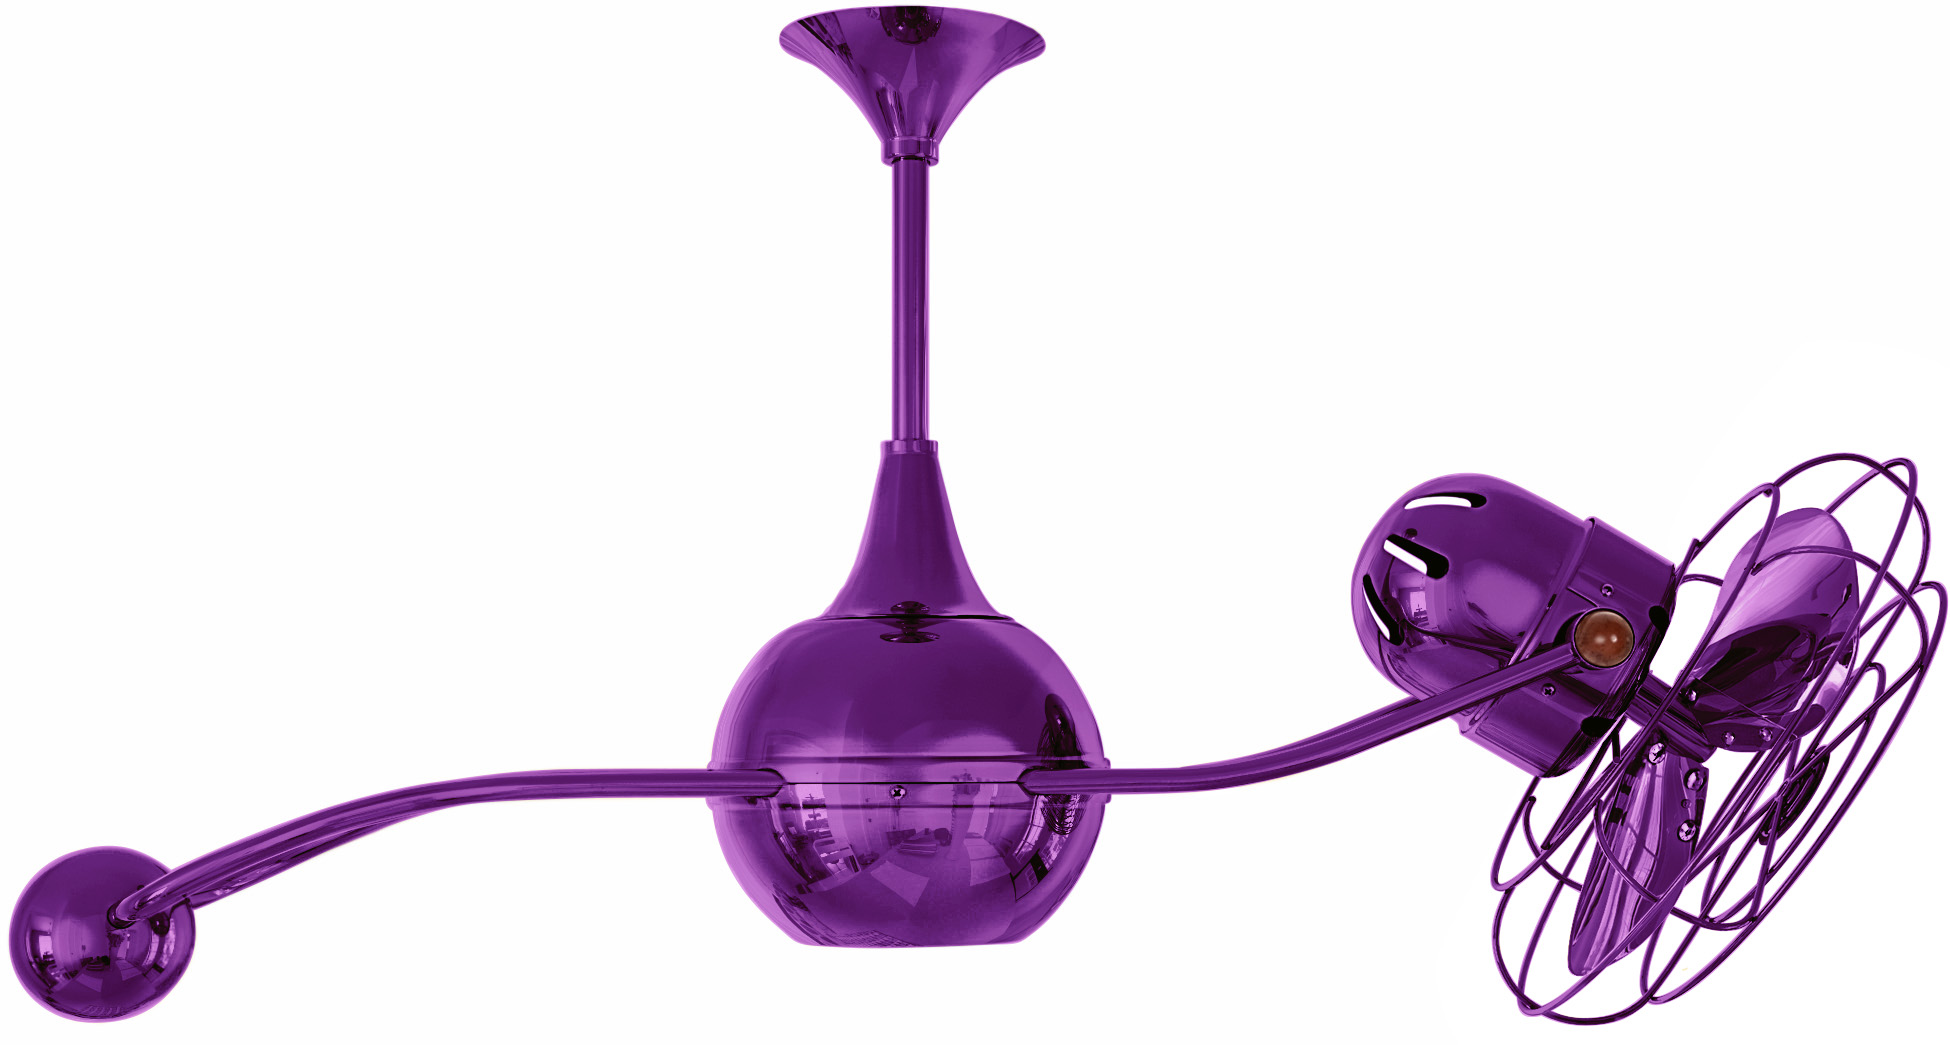 Brisa 2000 ceiling fan in purple / ametista finish with metal blades in decorative cage made by Matthews Fan Company.